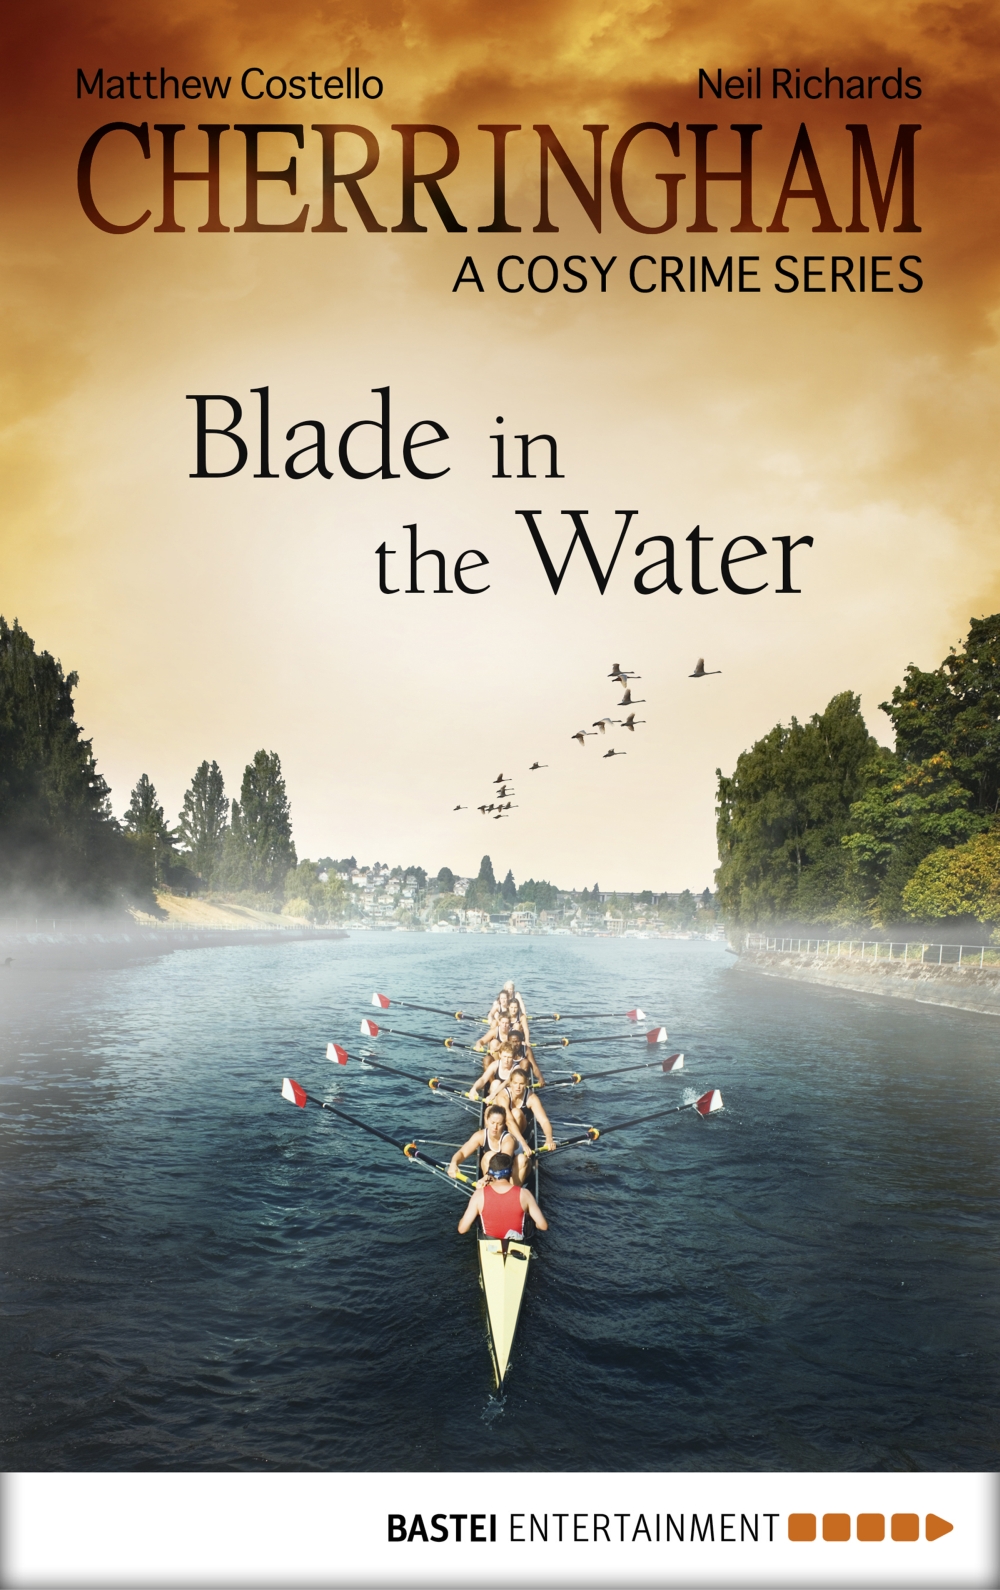 Cherringham--Blade in the Water (2015) by Neil Richards